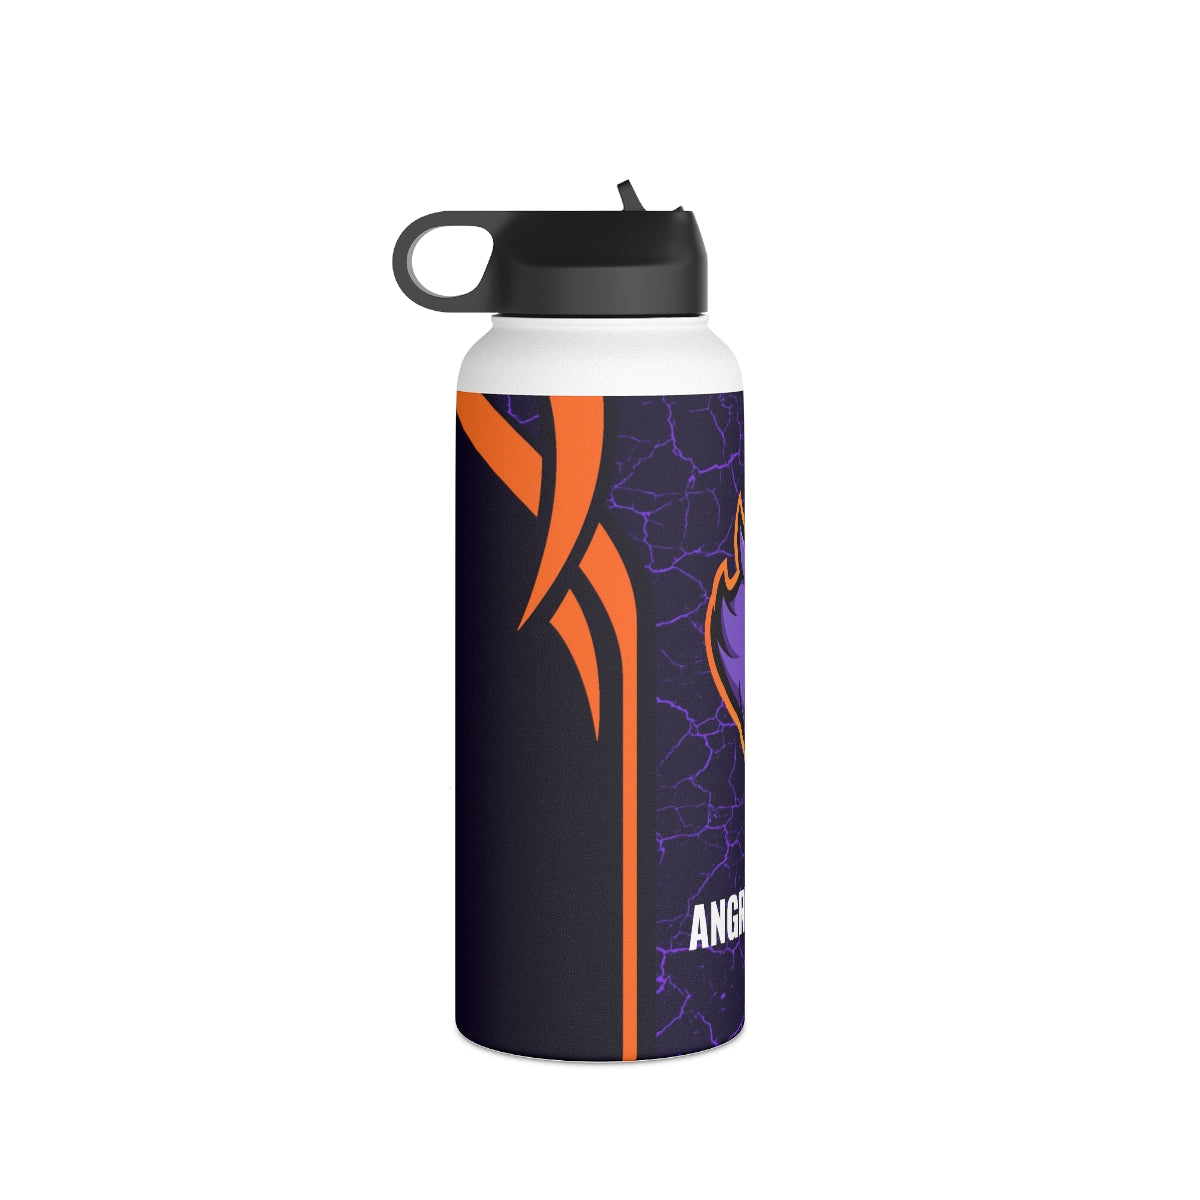 Angry Gaming Stainless Steel Water Bottle, Standard Lid